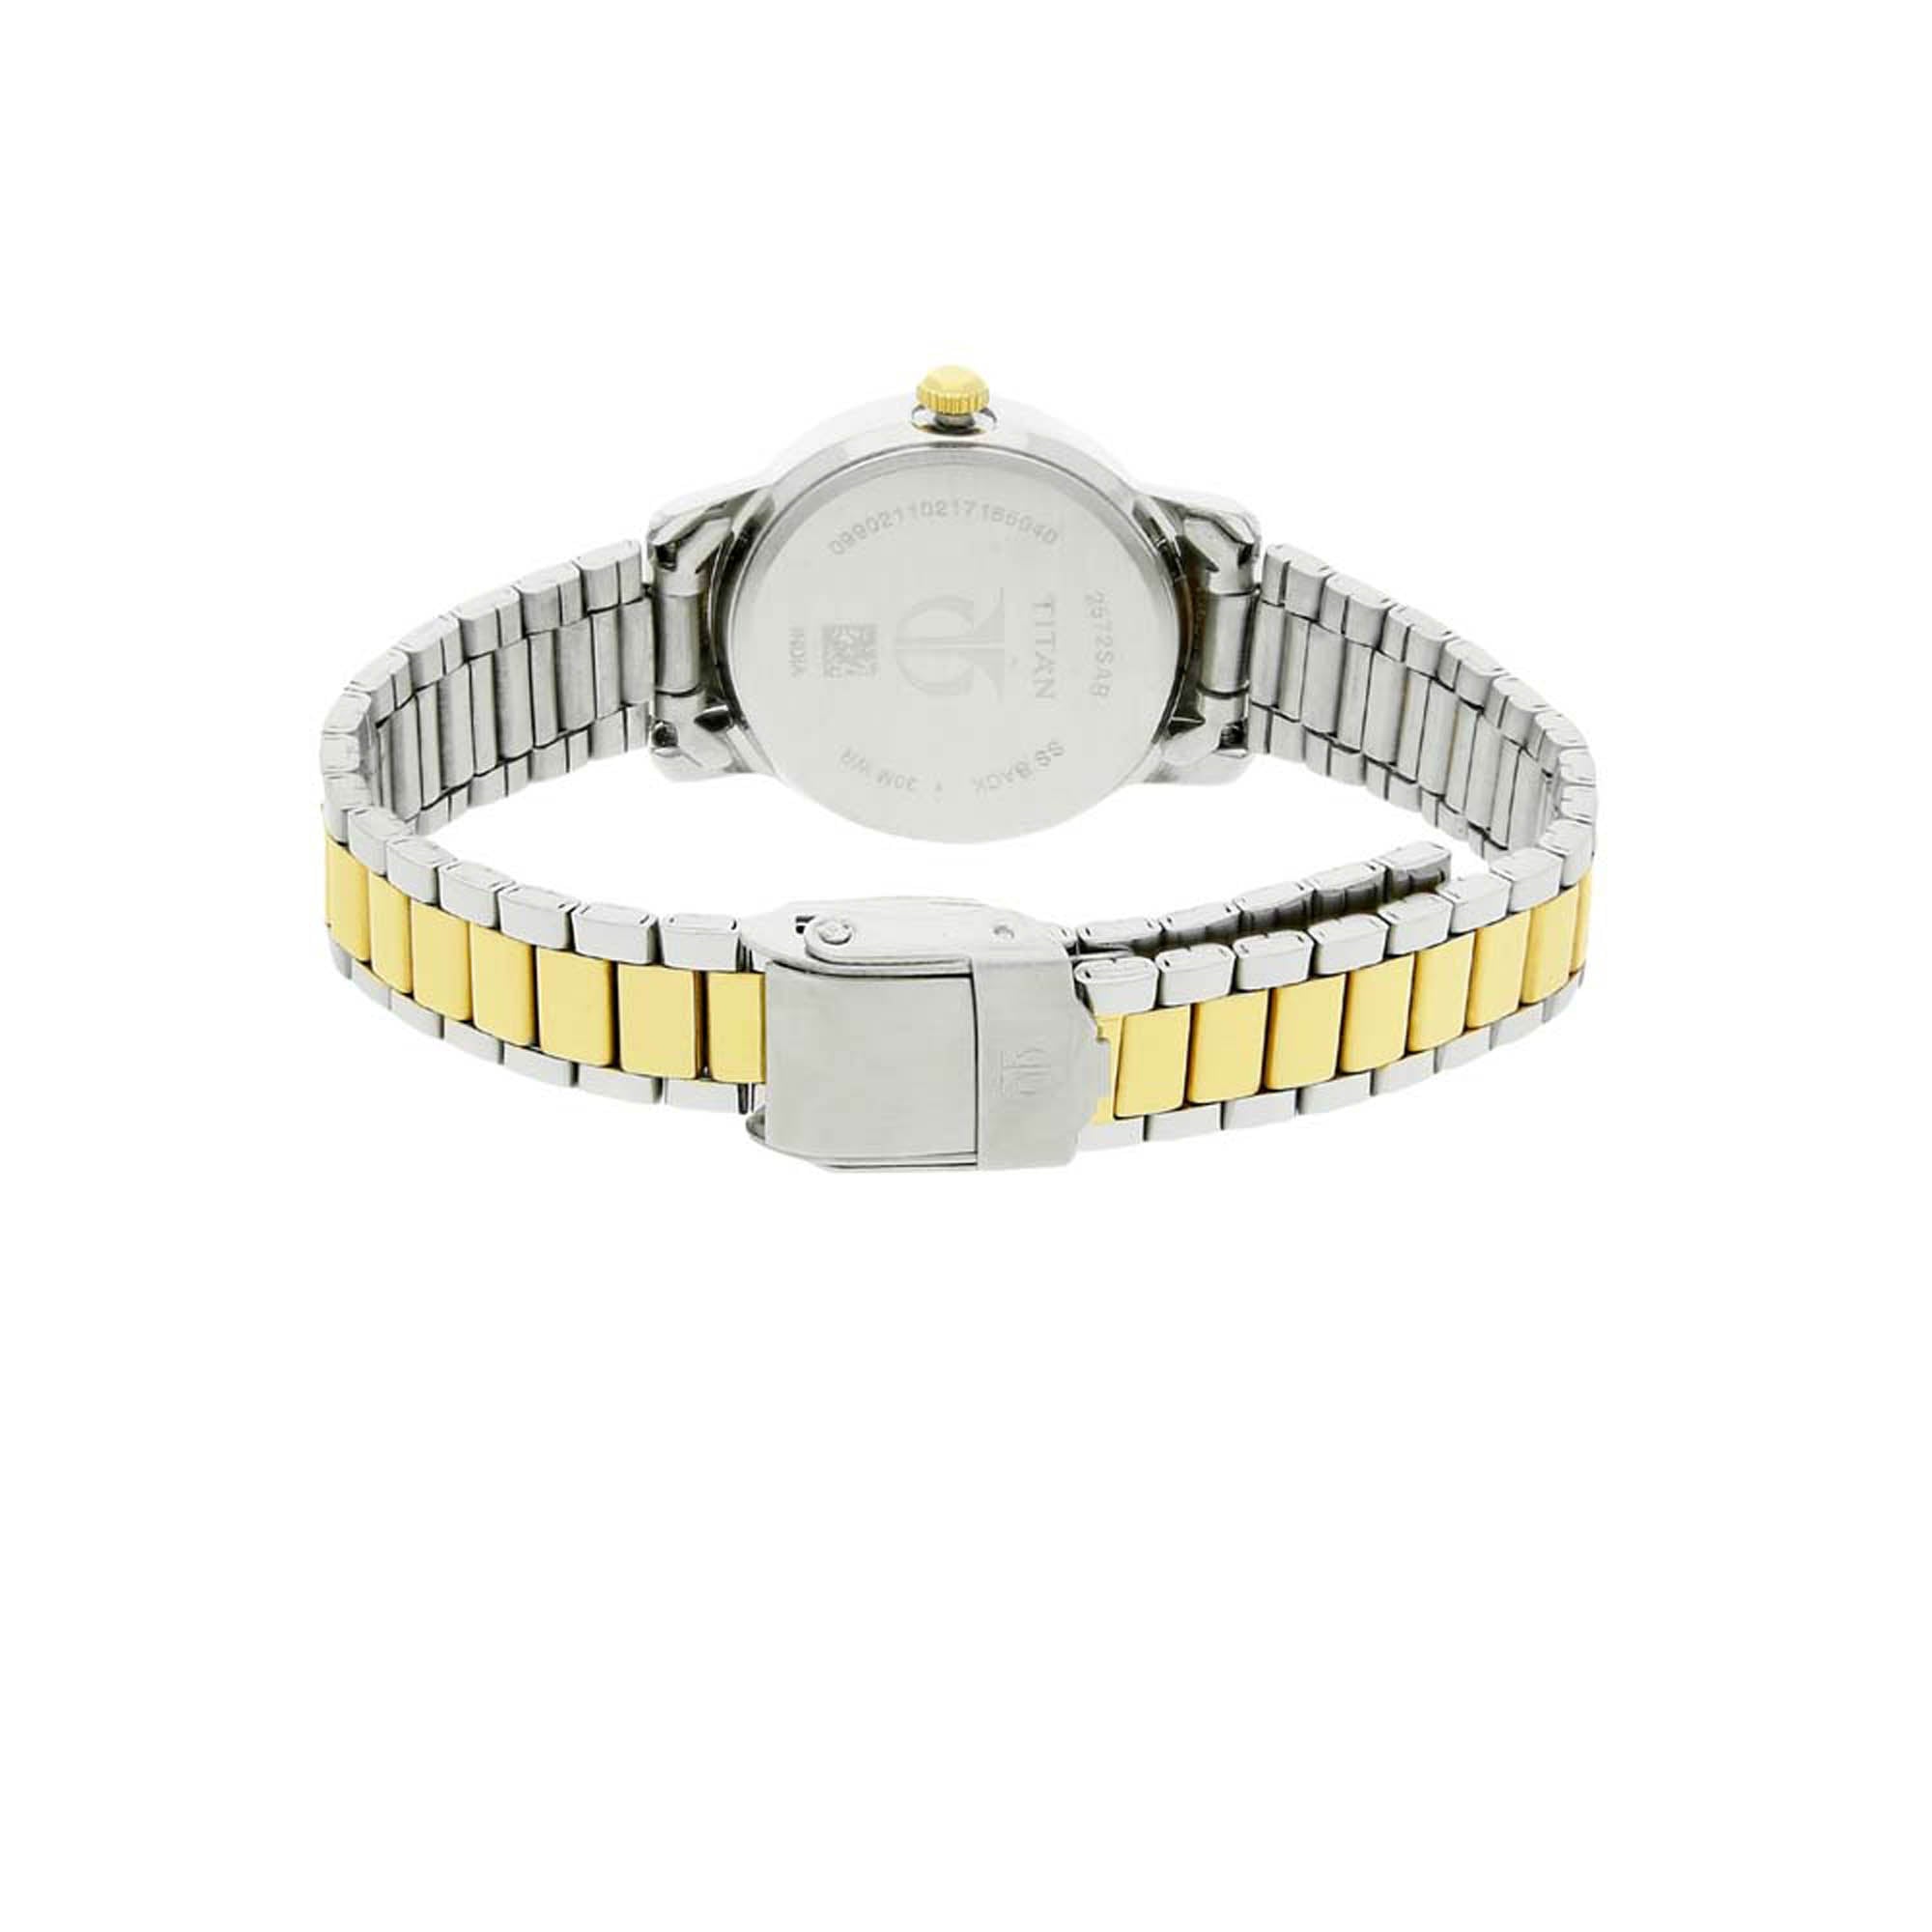 Titan Karishma White Dial Analog with Date Stainless Steel Strap watch for Women